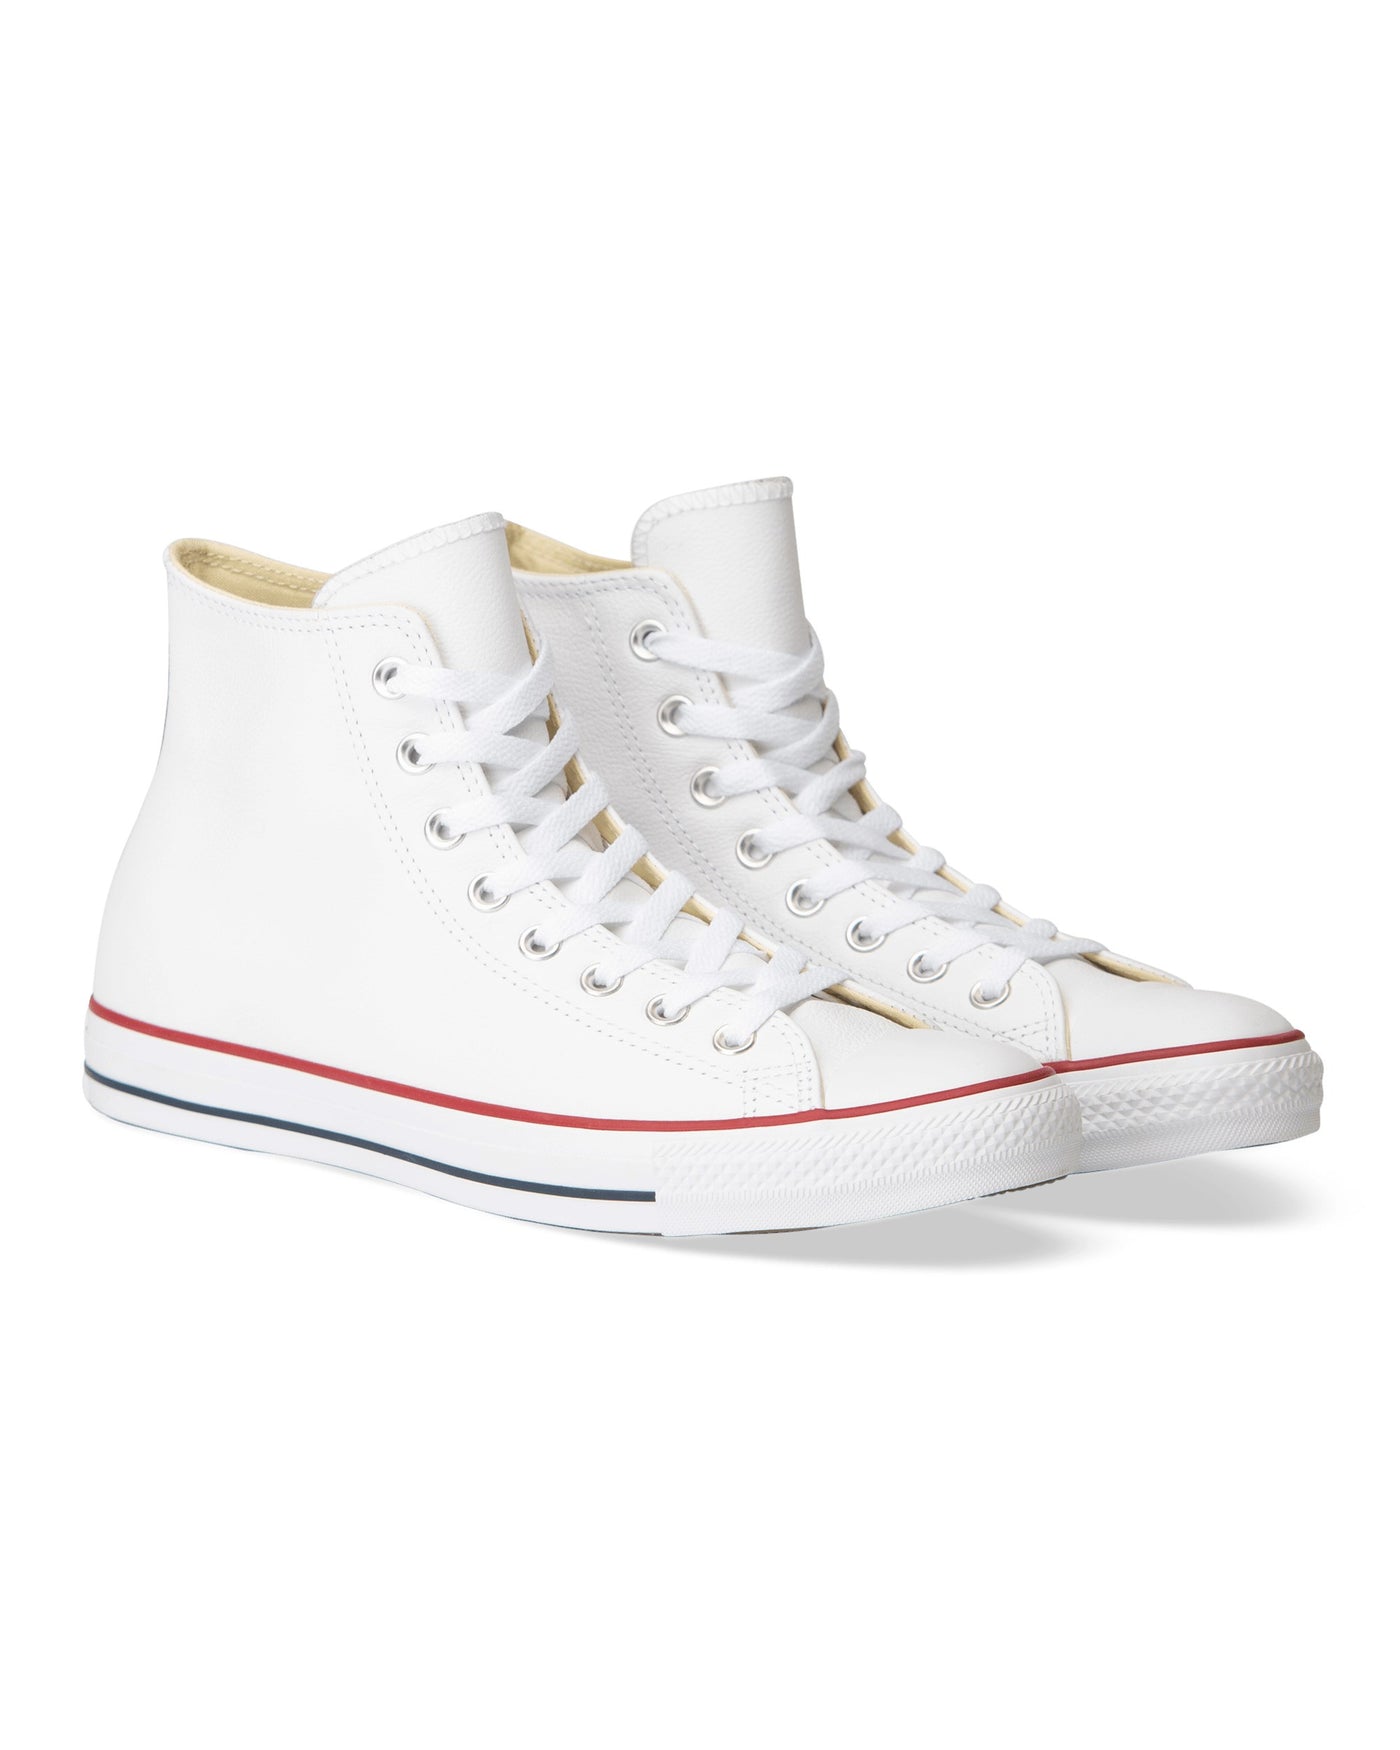 Converse Chuck Taylor Leather High Top White